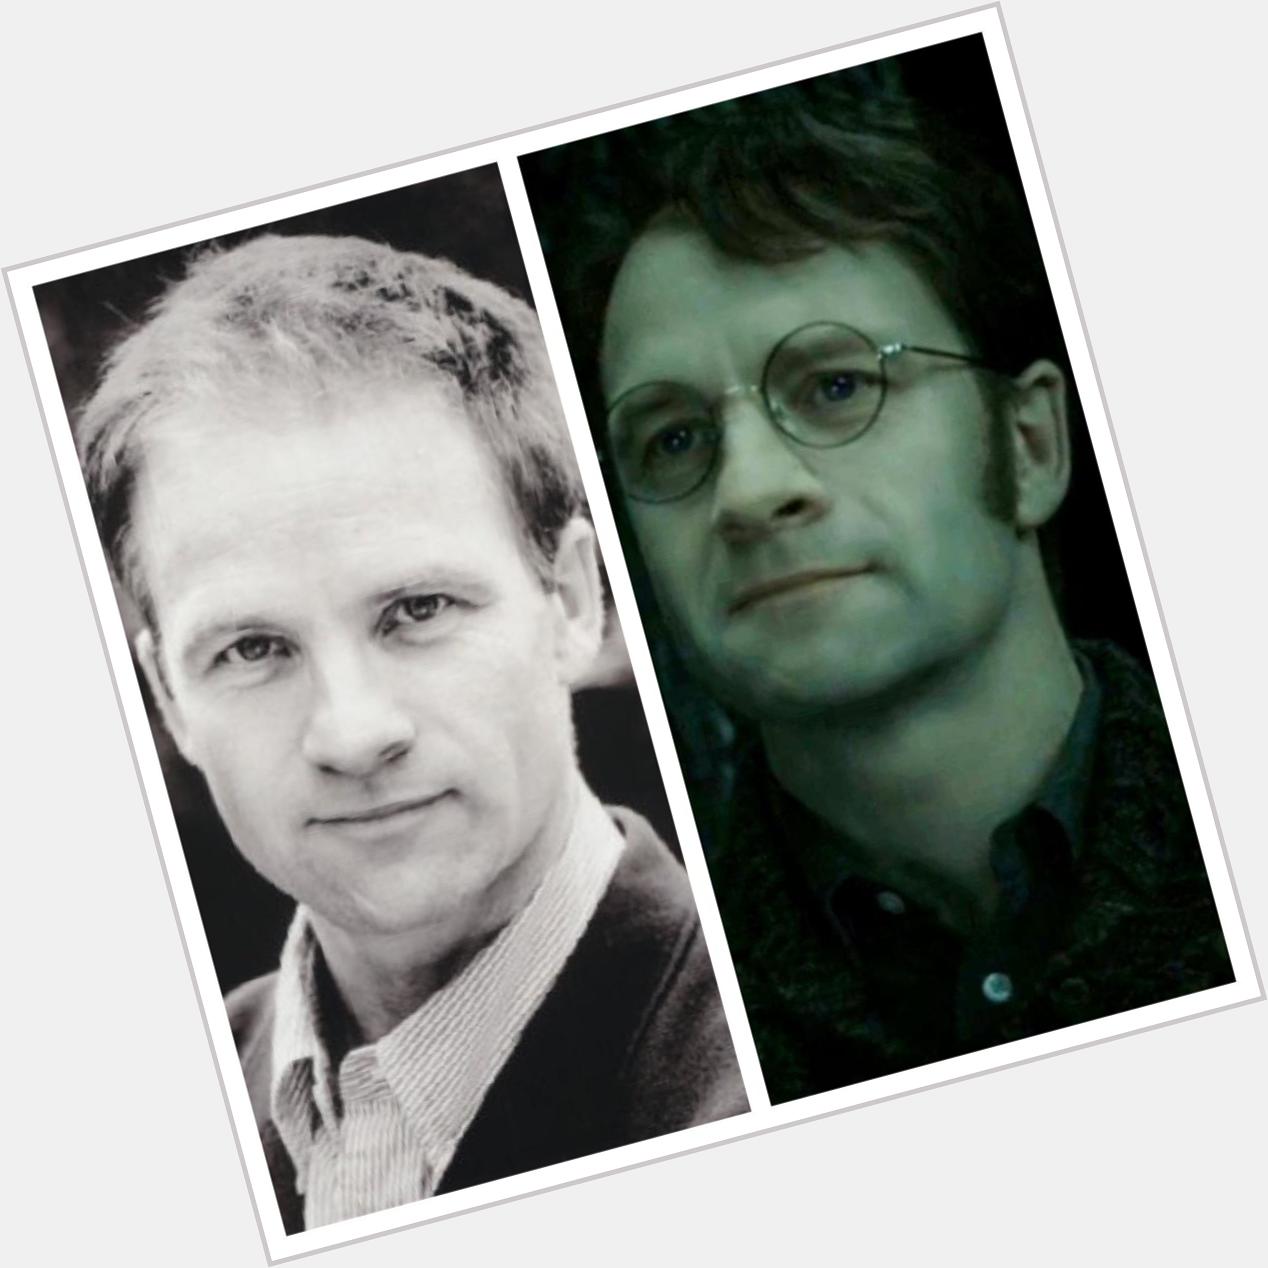 March 27: Happy Birthday, Adrian Rawlins! He played James Potter in the films, and also shares a birthday with him! 